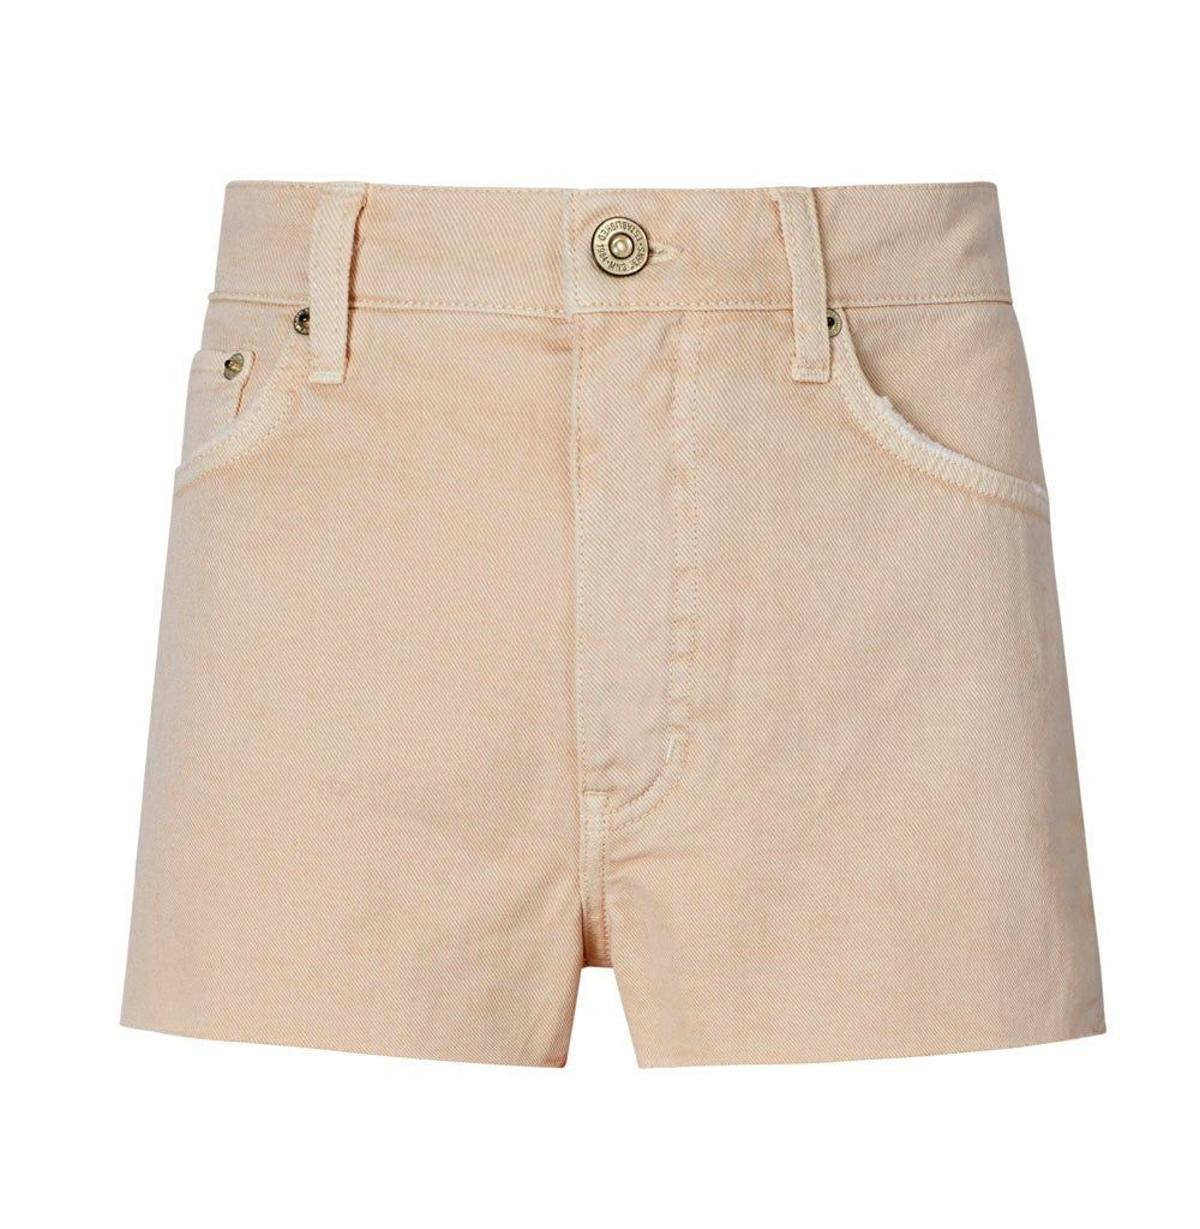 Shorts beige de Mango Committed PV19